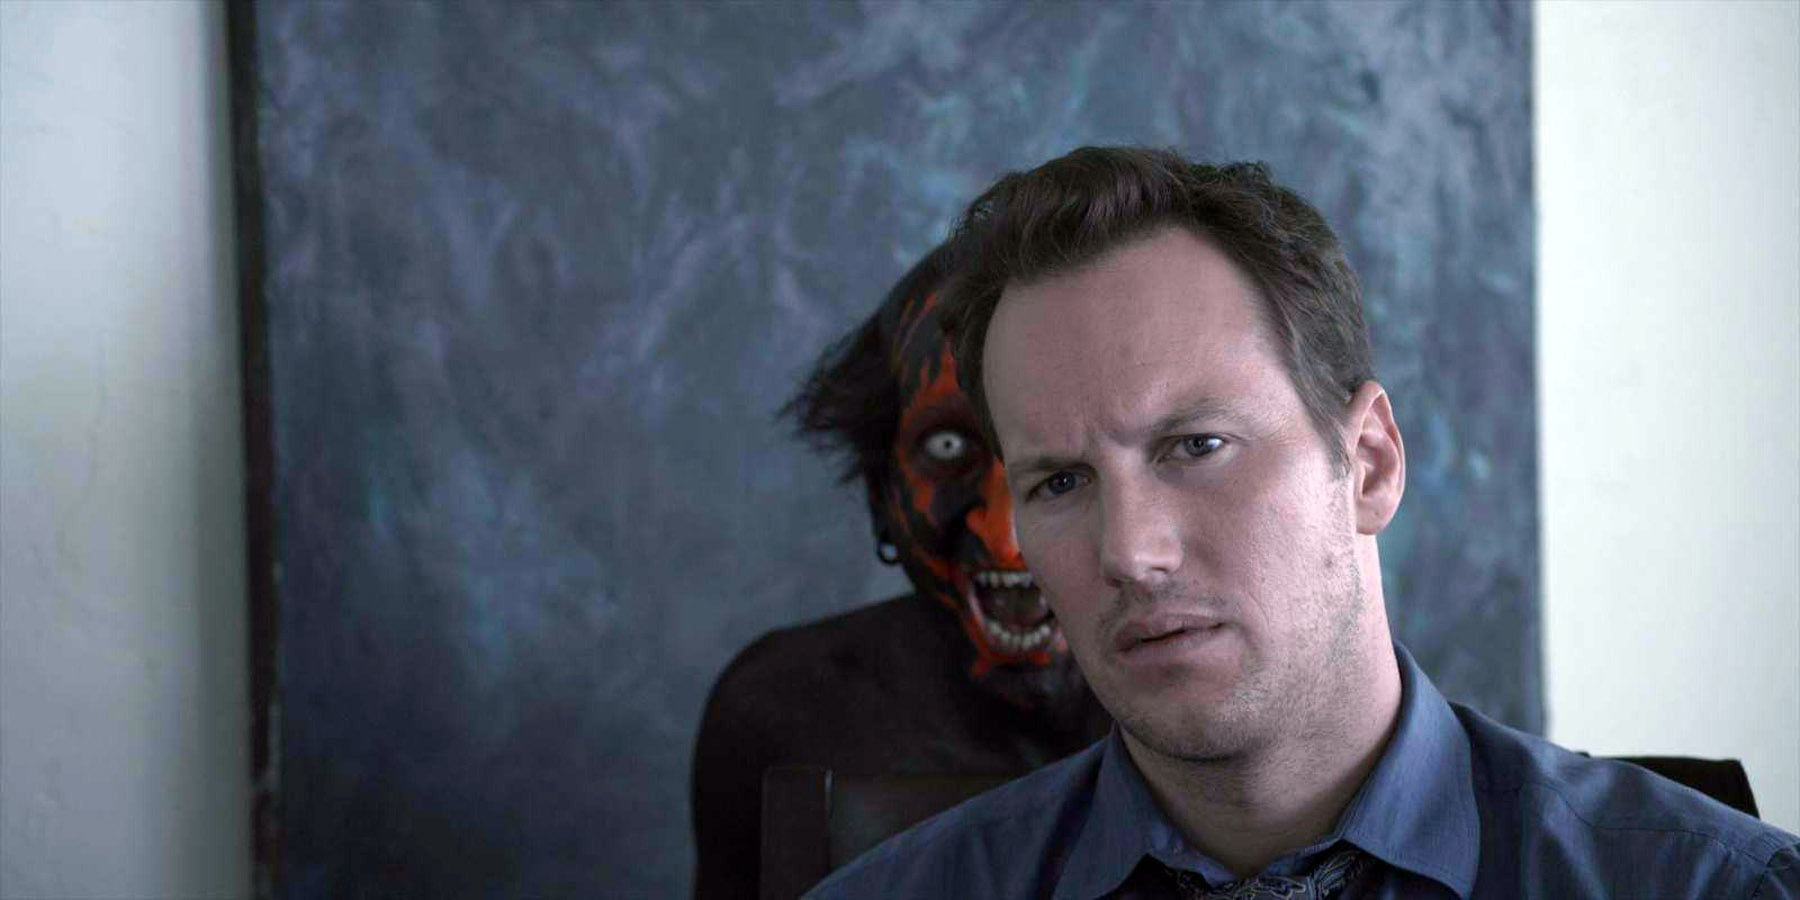 Josh Lambert (Patrick Wilson) stares off at something while the Lipstick-Face Demon stands behind him.